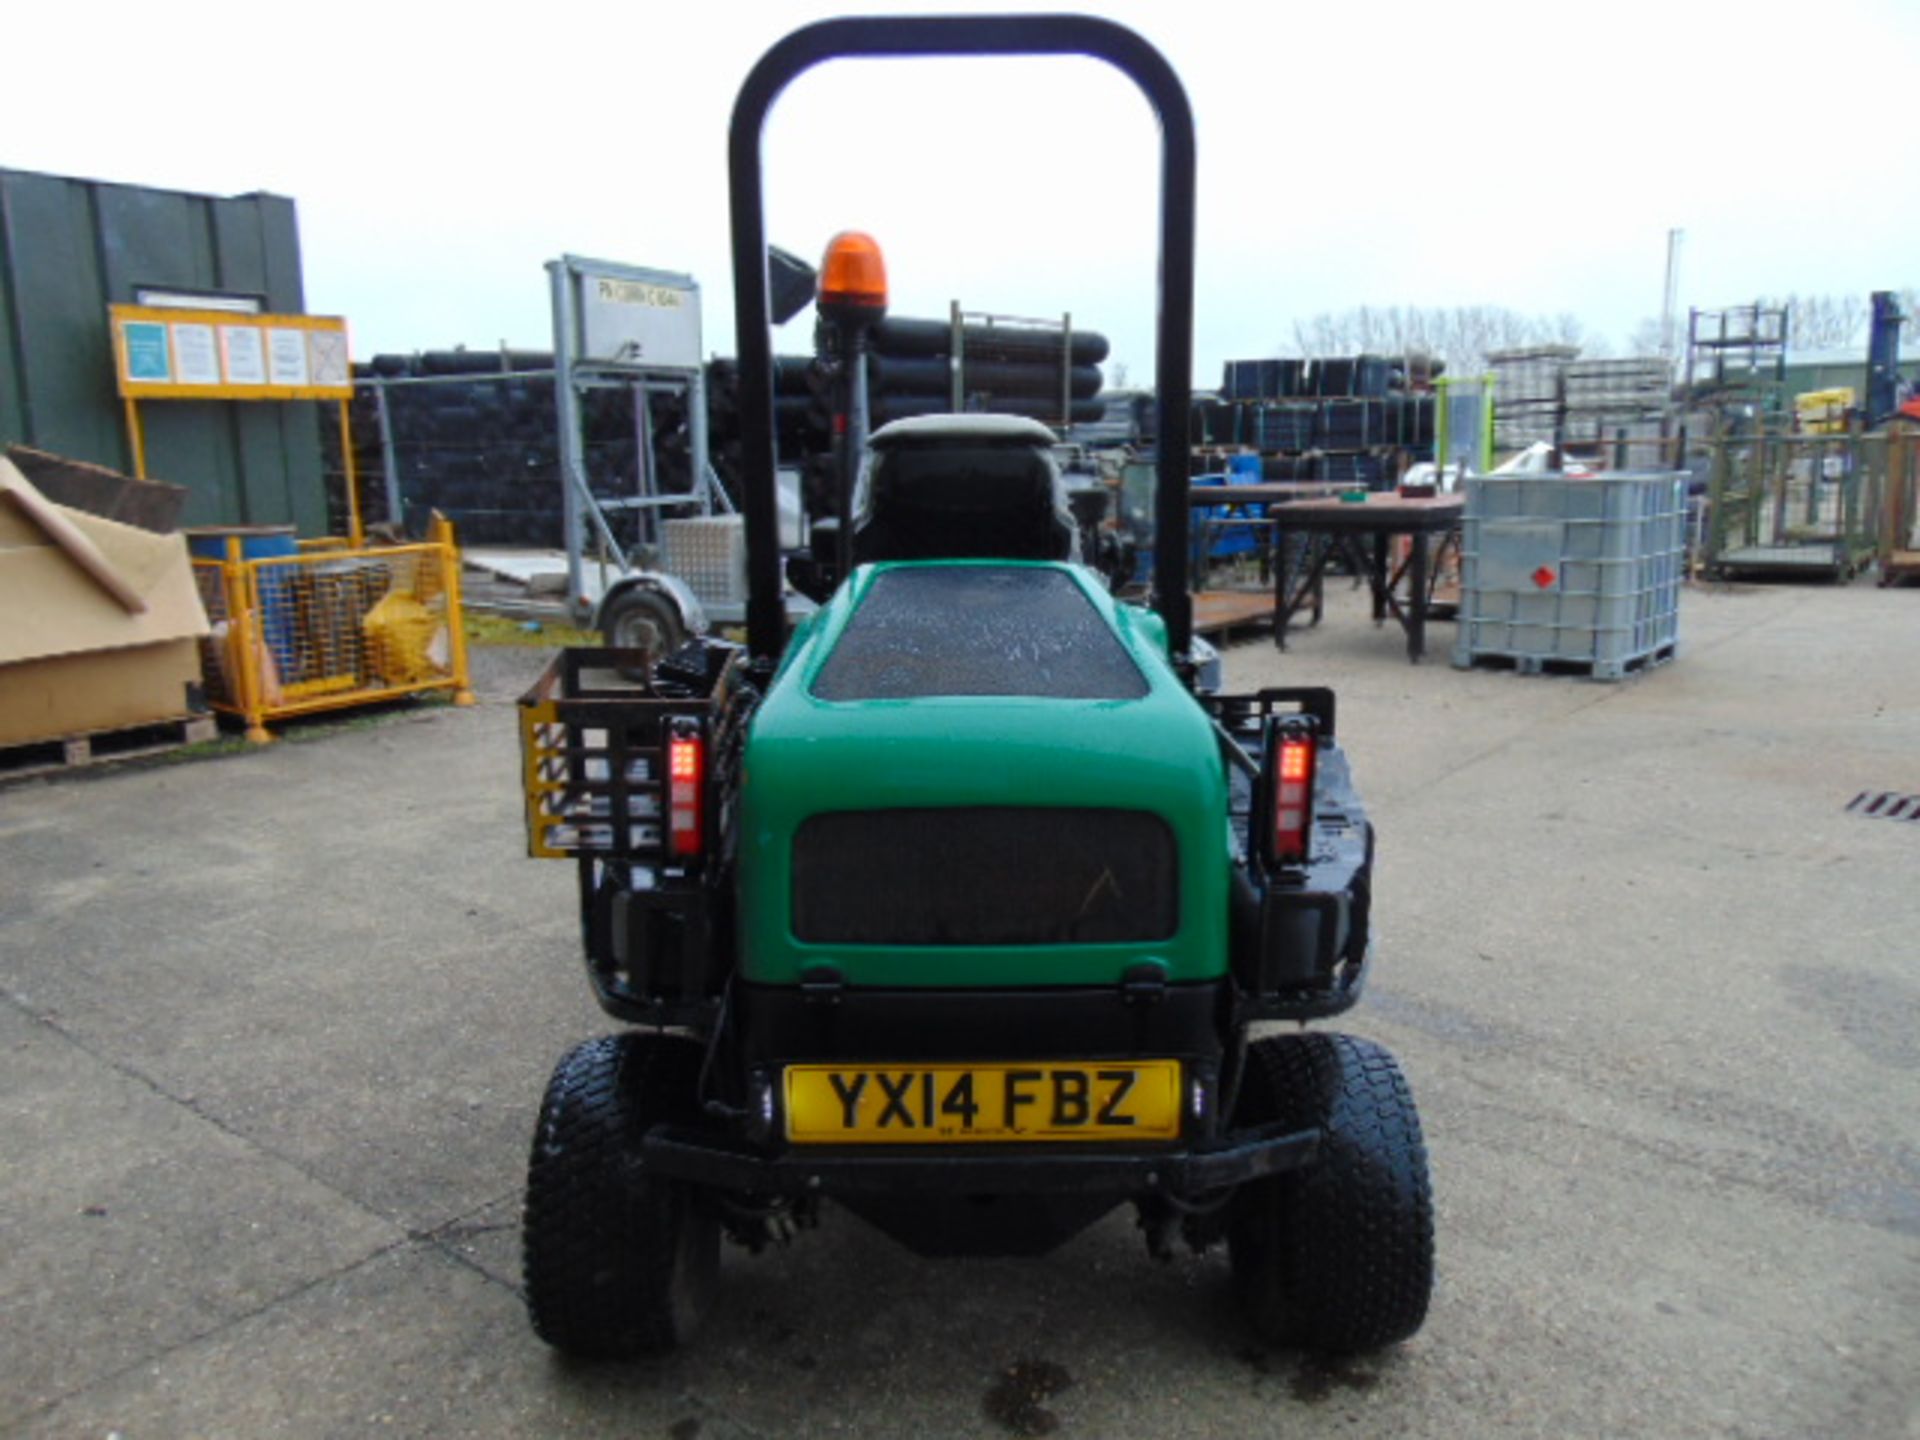 2014 Ransomes HR300 C/W Muthing Outfront Flail Mower ONLY 2,258 HOURS! - Image 7 of 19